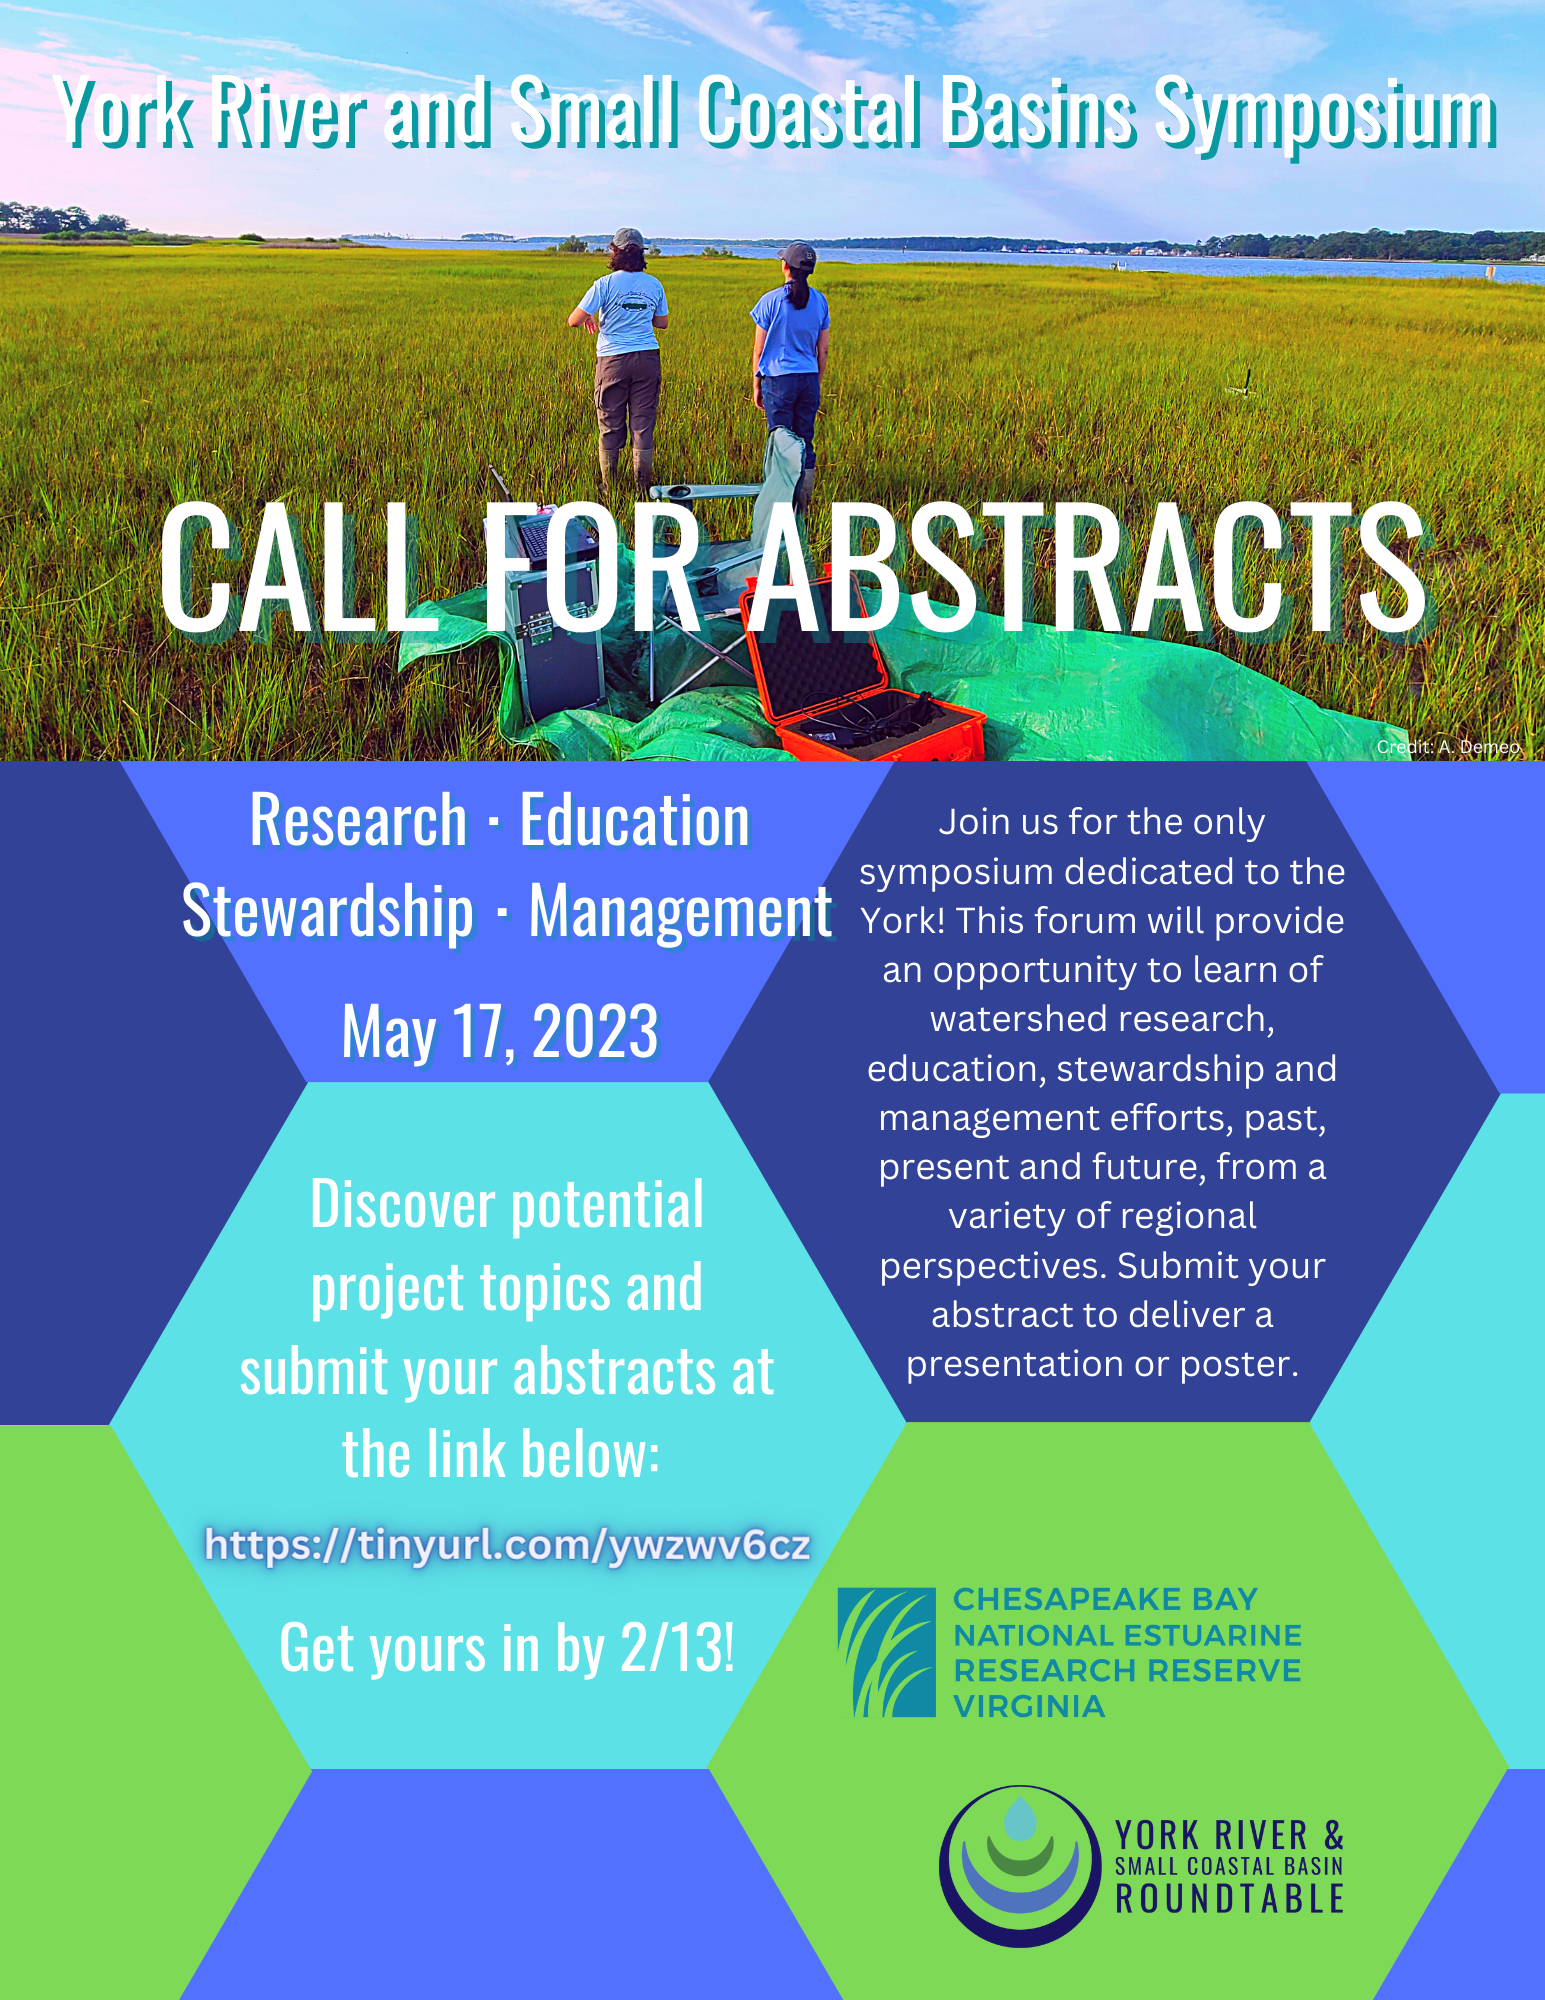 call-for-abstracts---image.png